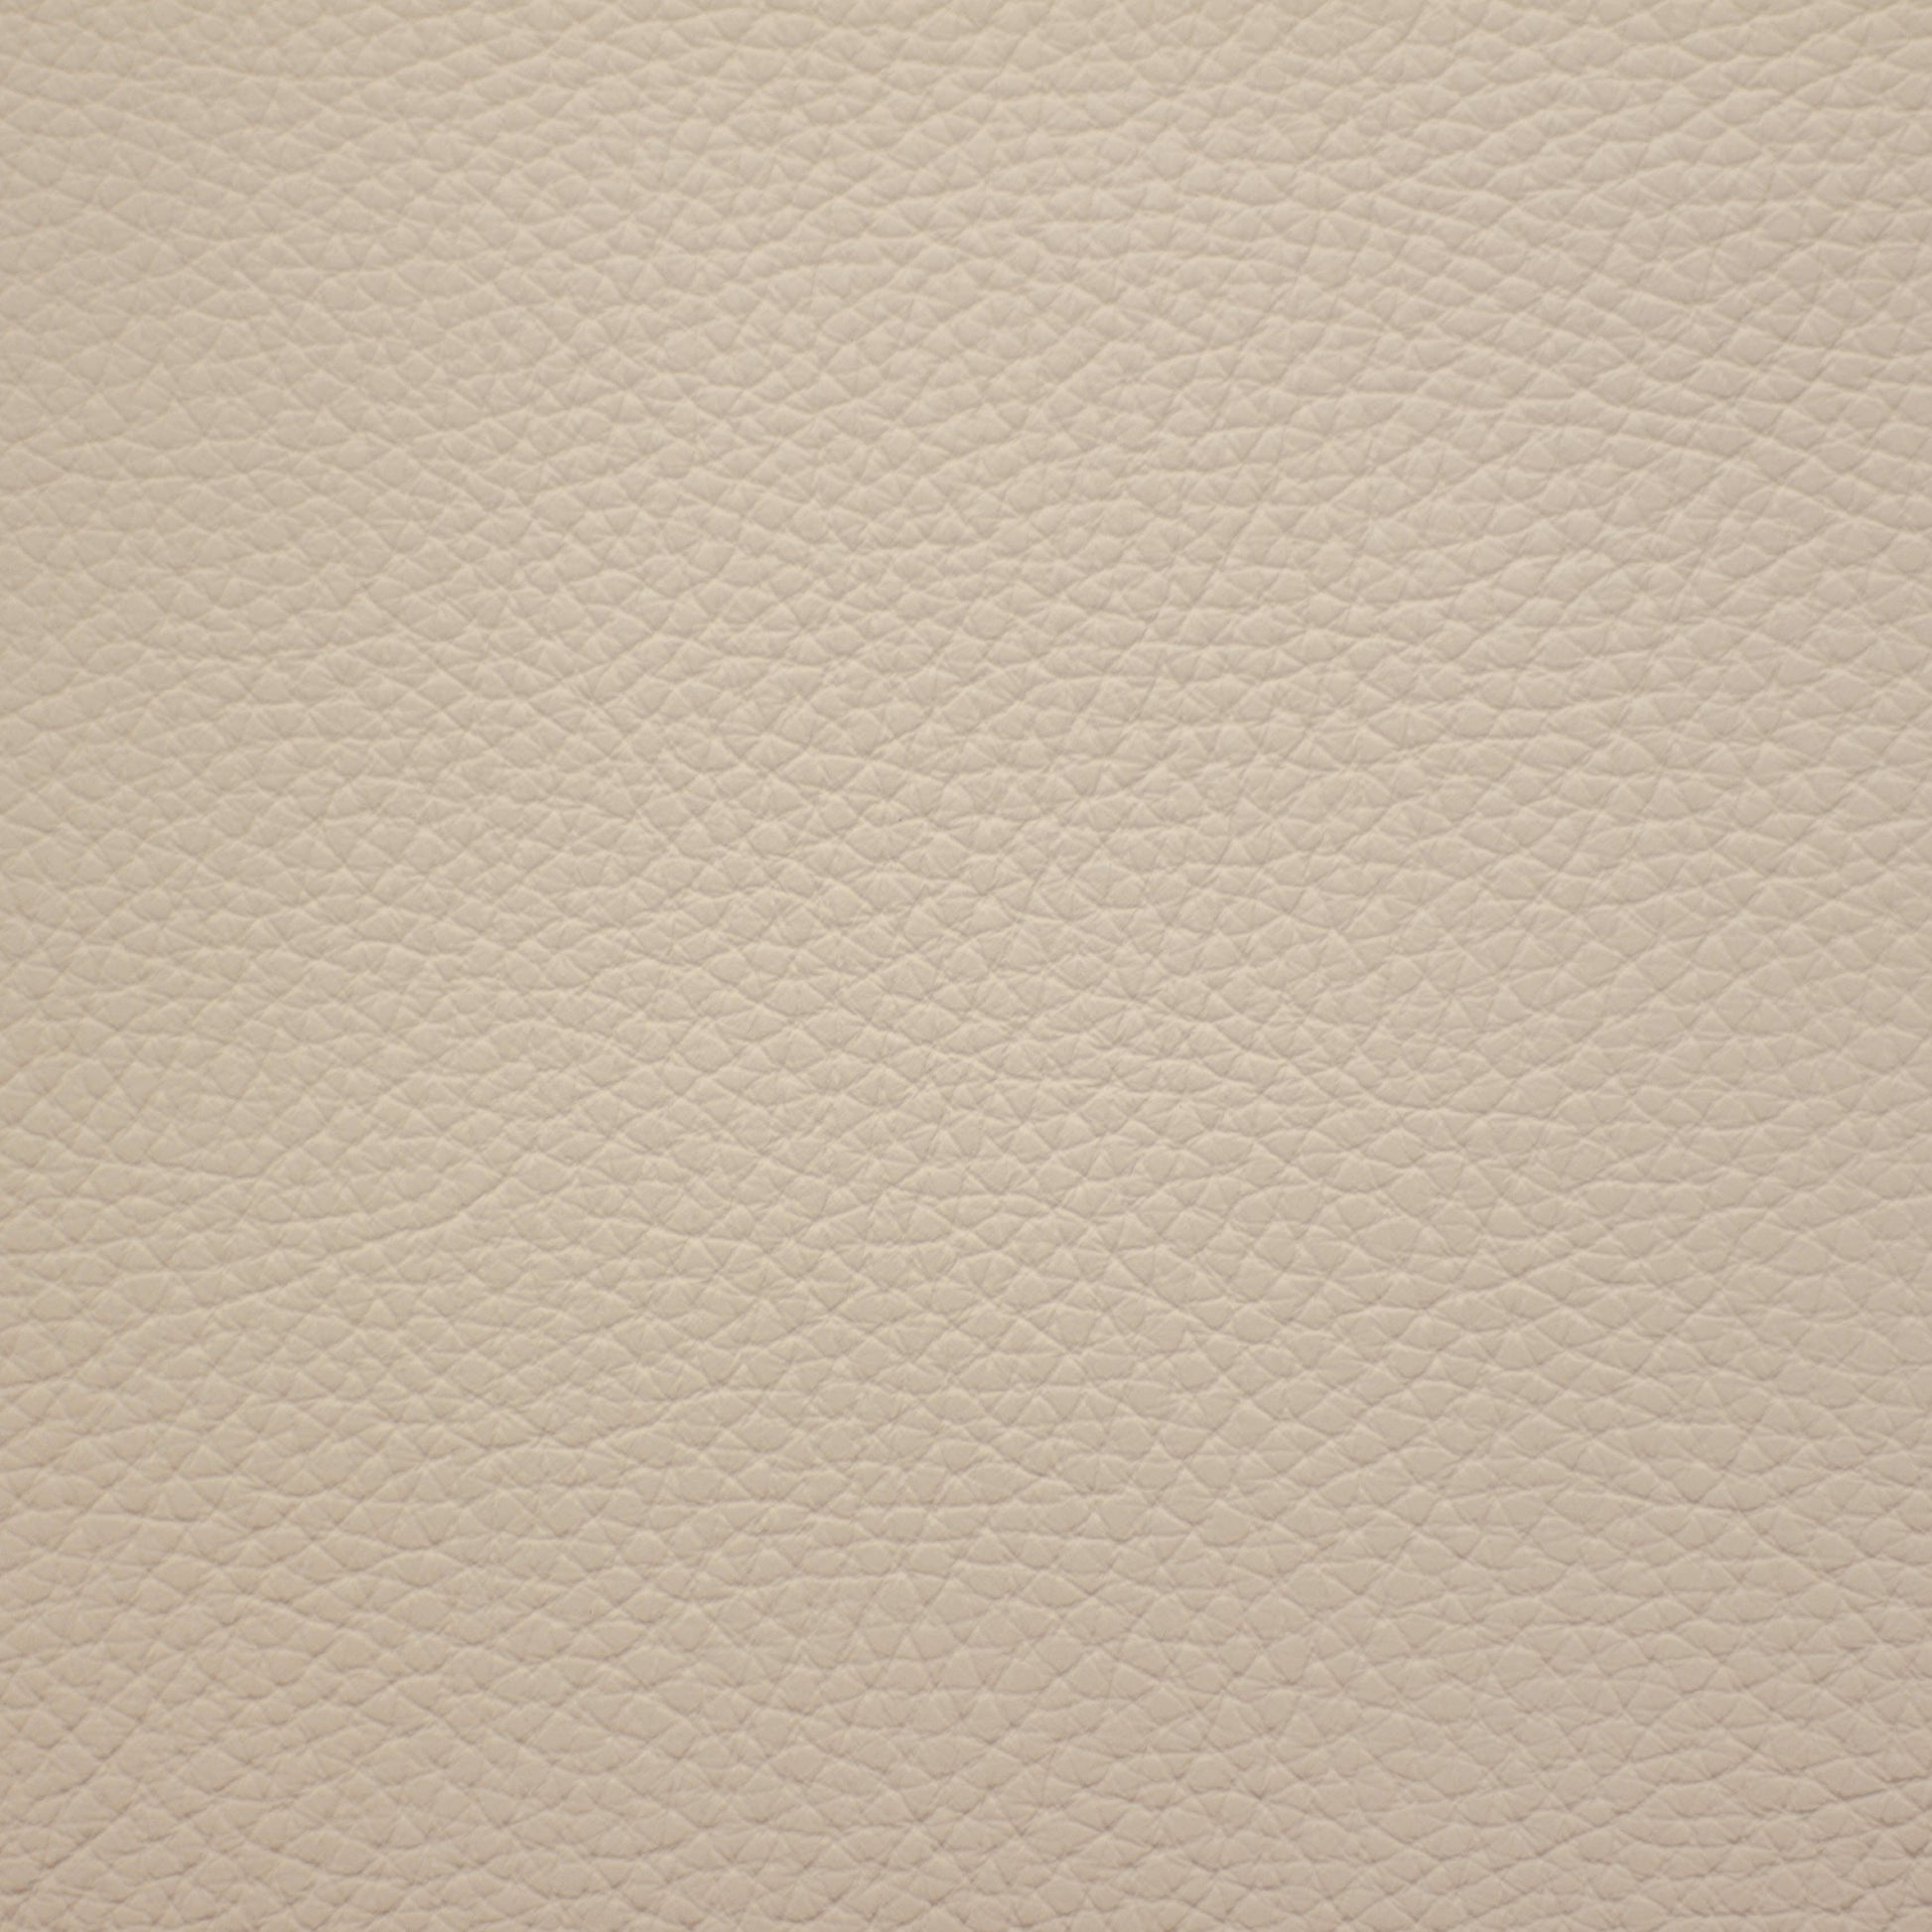 Mystique, Wishbone, Iconic® Antimicrobial & Cleanable, Hospitality Leather Hide